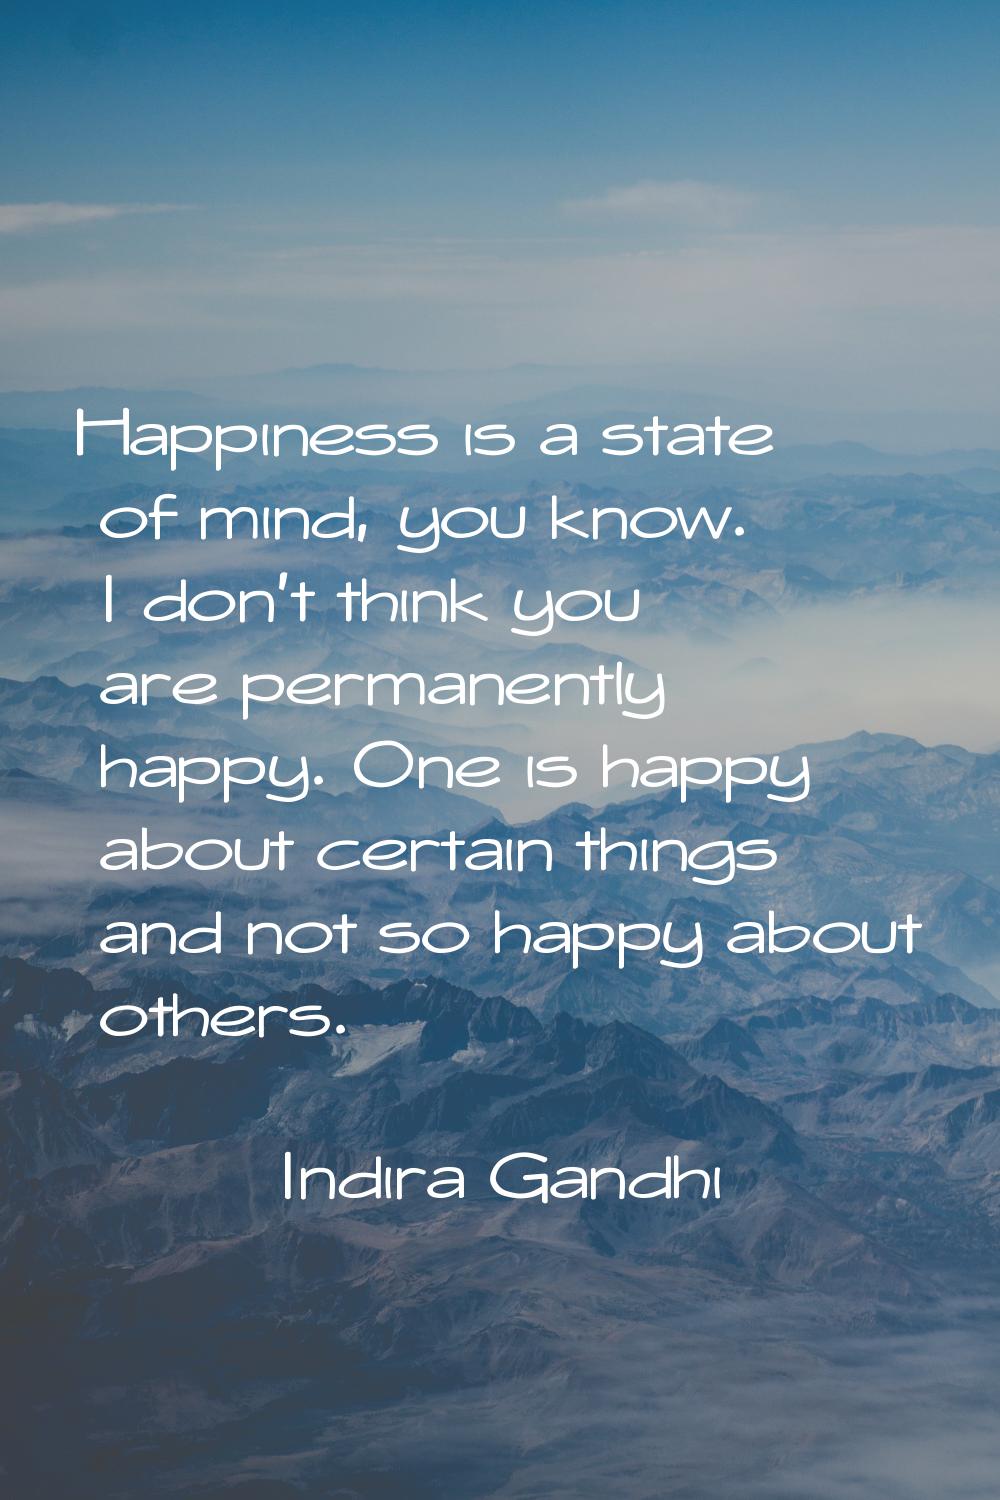 Happiness is a state of mind, you know. I don't think you are permanently happy. One is happy about